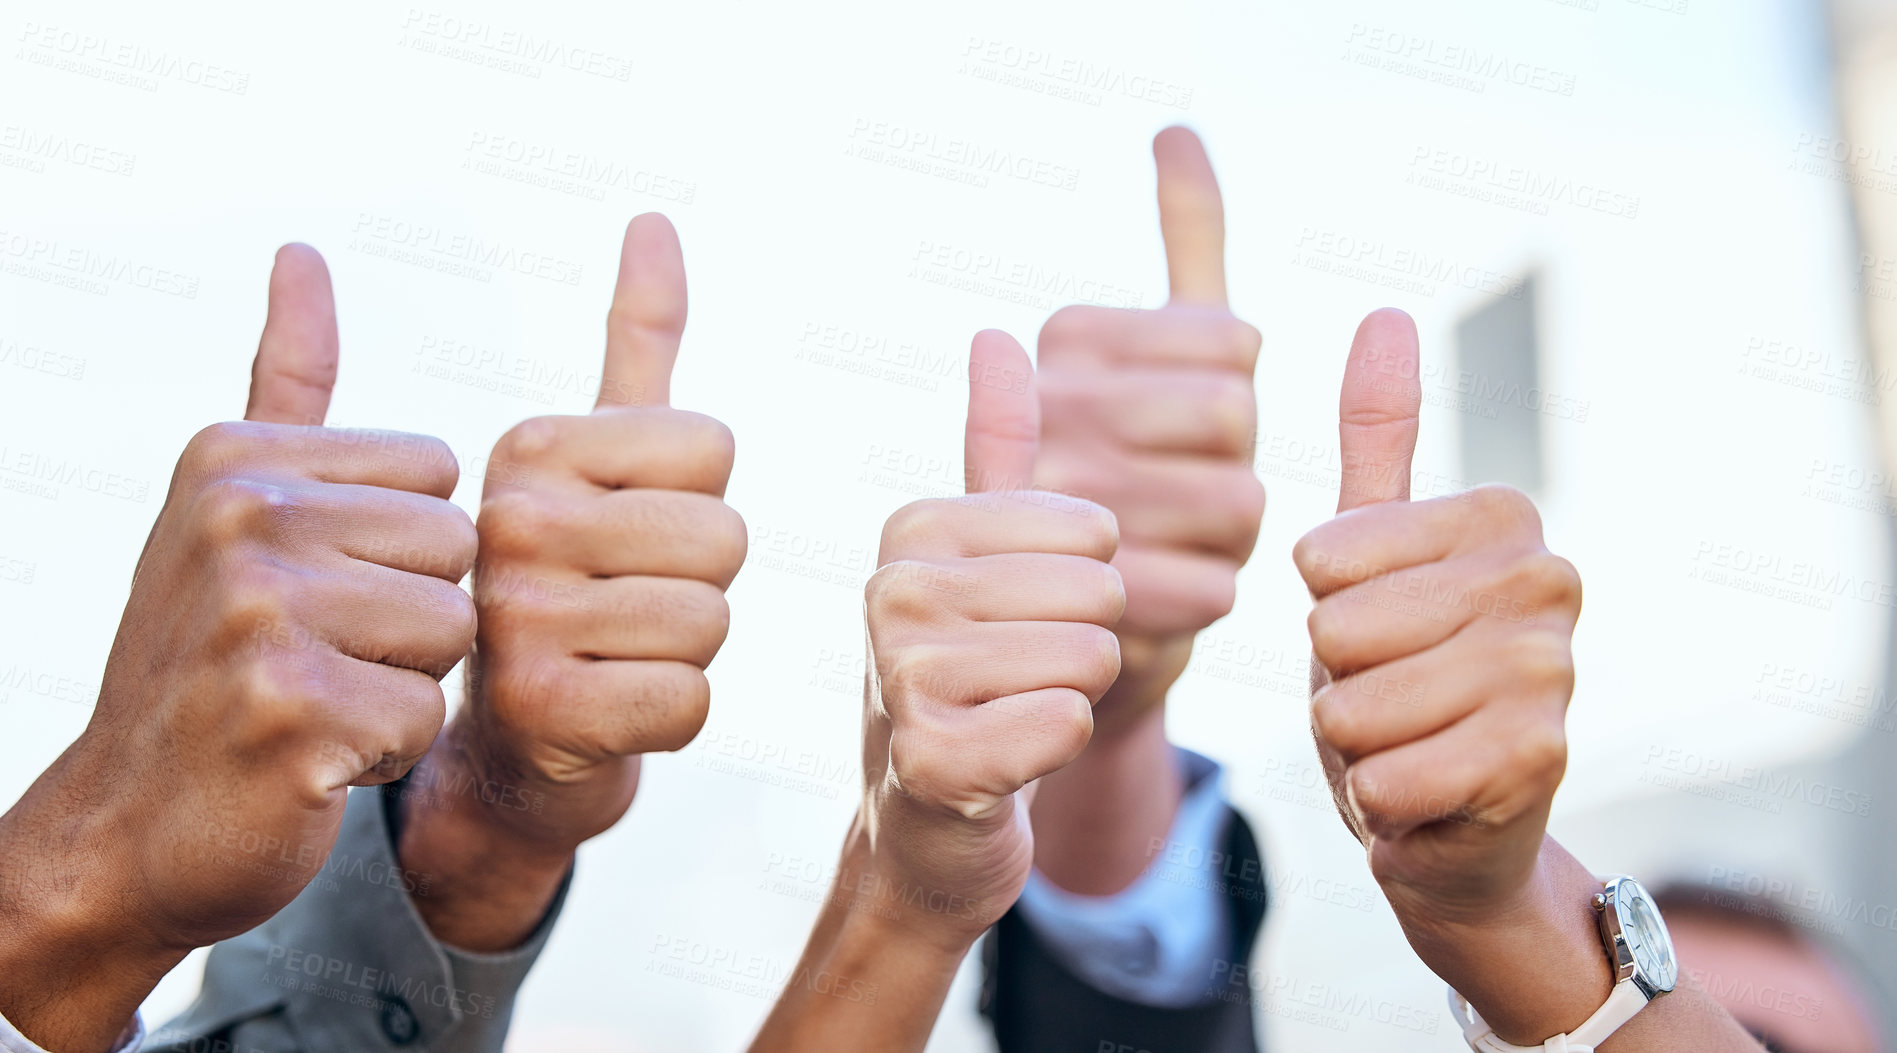 Buy stock photo Shot of a group of unrecognizable businesspeople showing a thumbs up